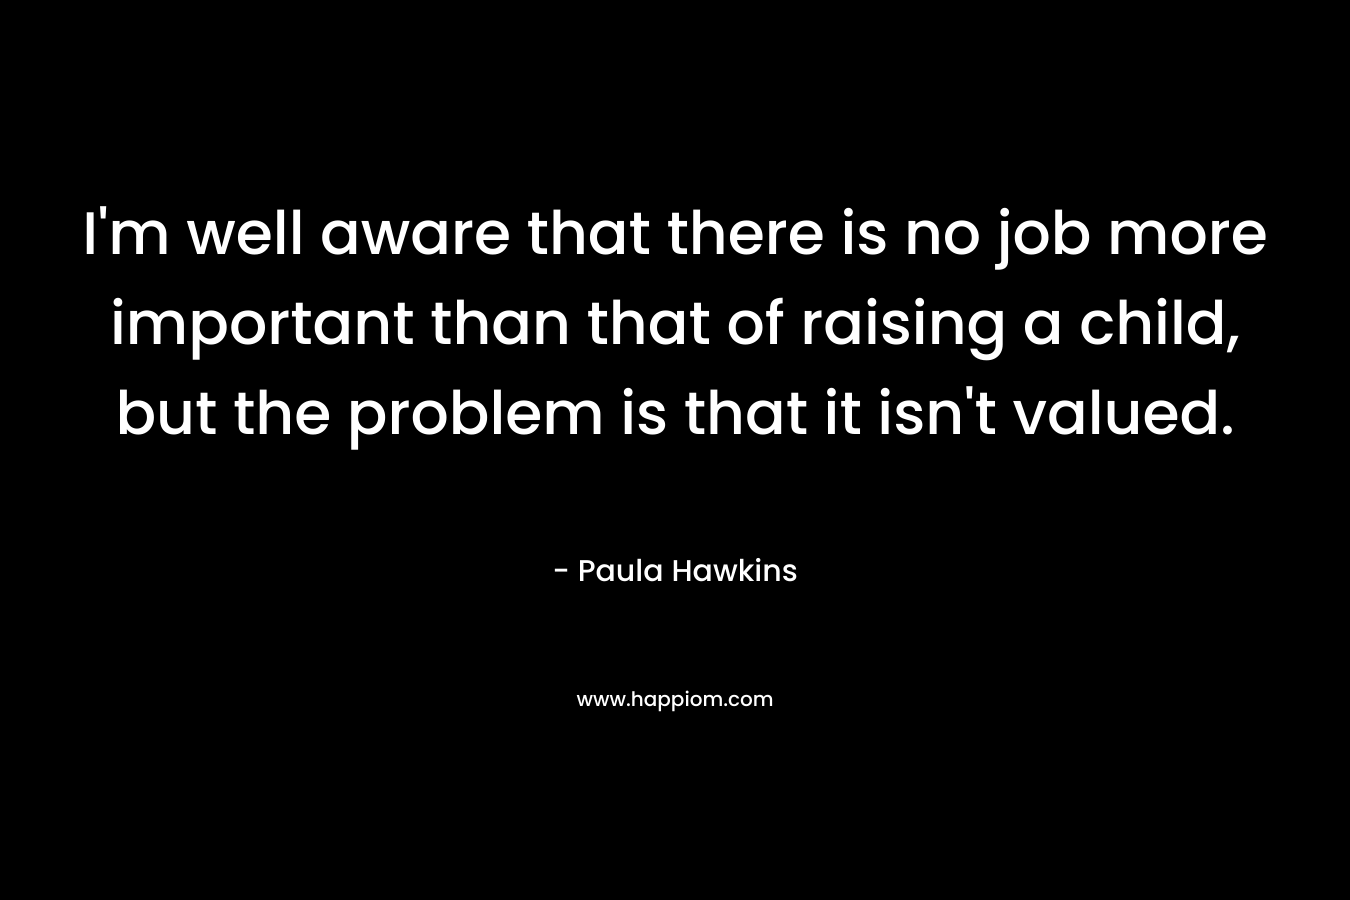 I’m well aware that there is no job more important than that of raising a child, but the problem is that it isn’t valued. – Paula Hawkins